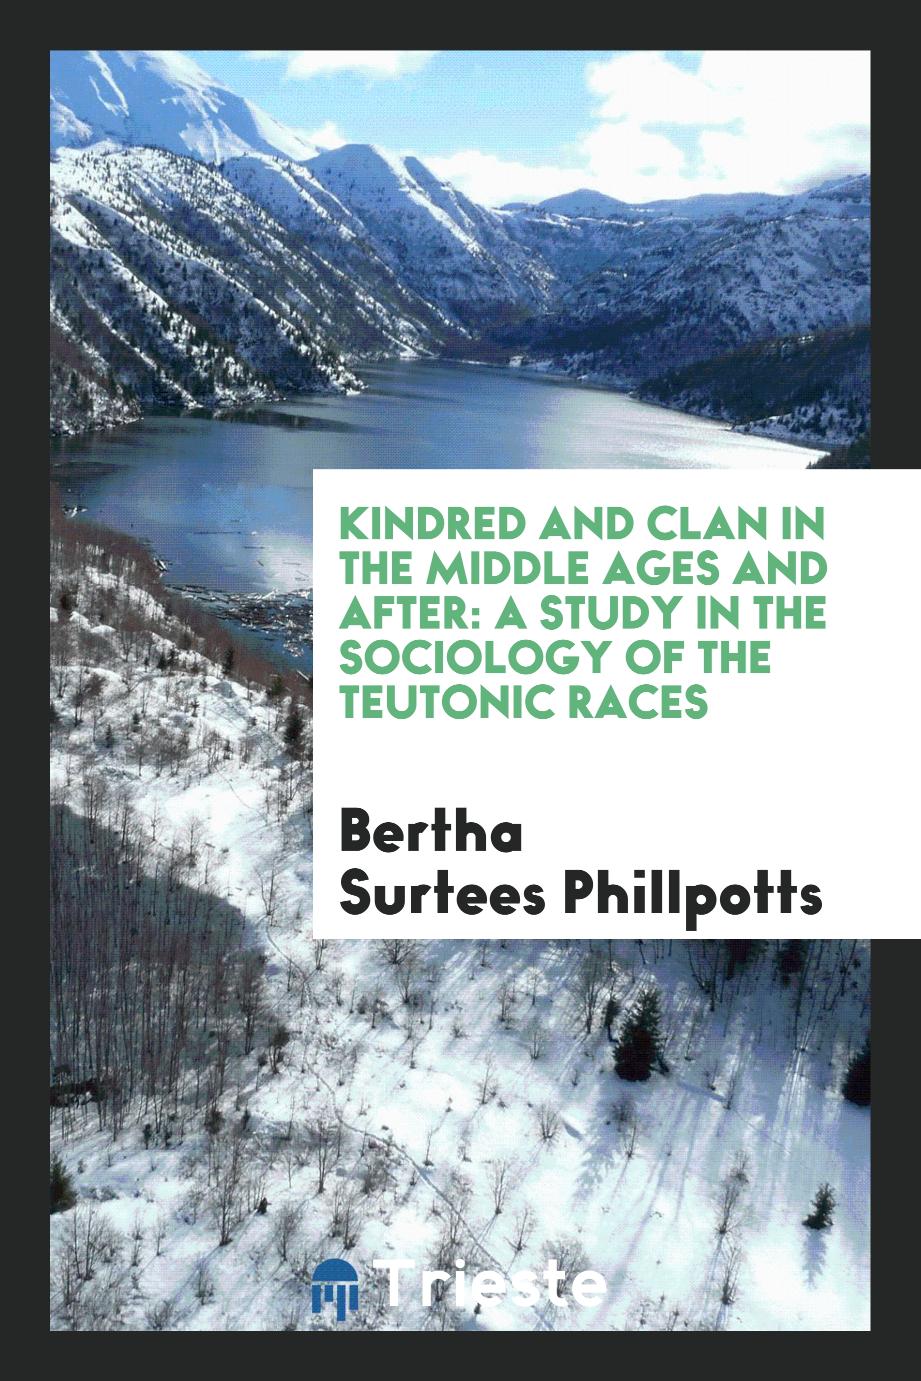 Kindred and Clan in the Middle Ages and After: A Study in the Sociology of the Teutonic Races